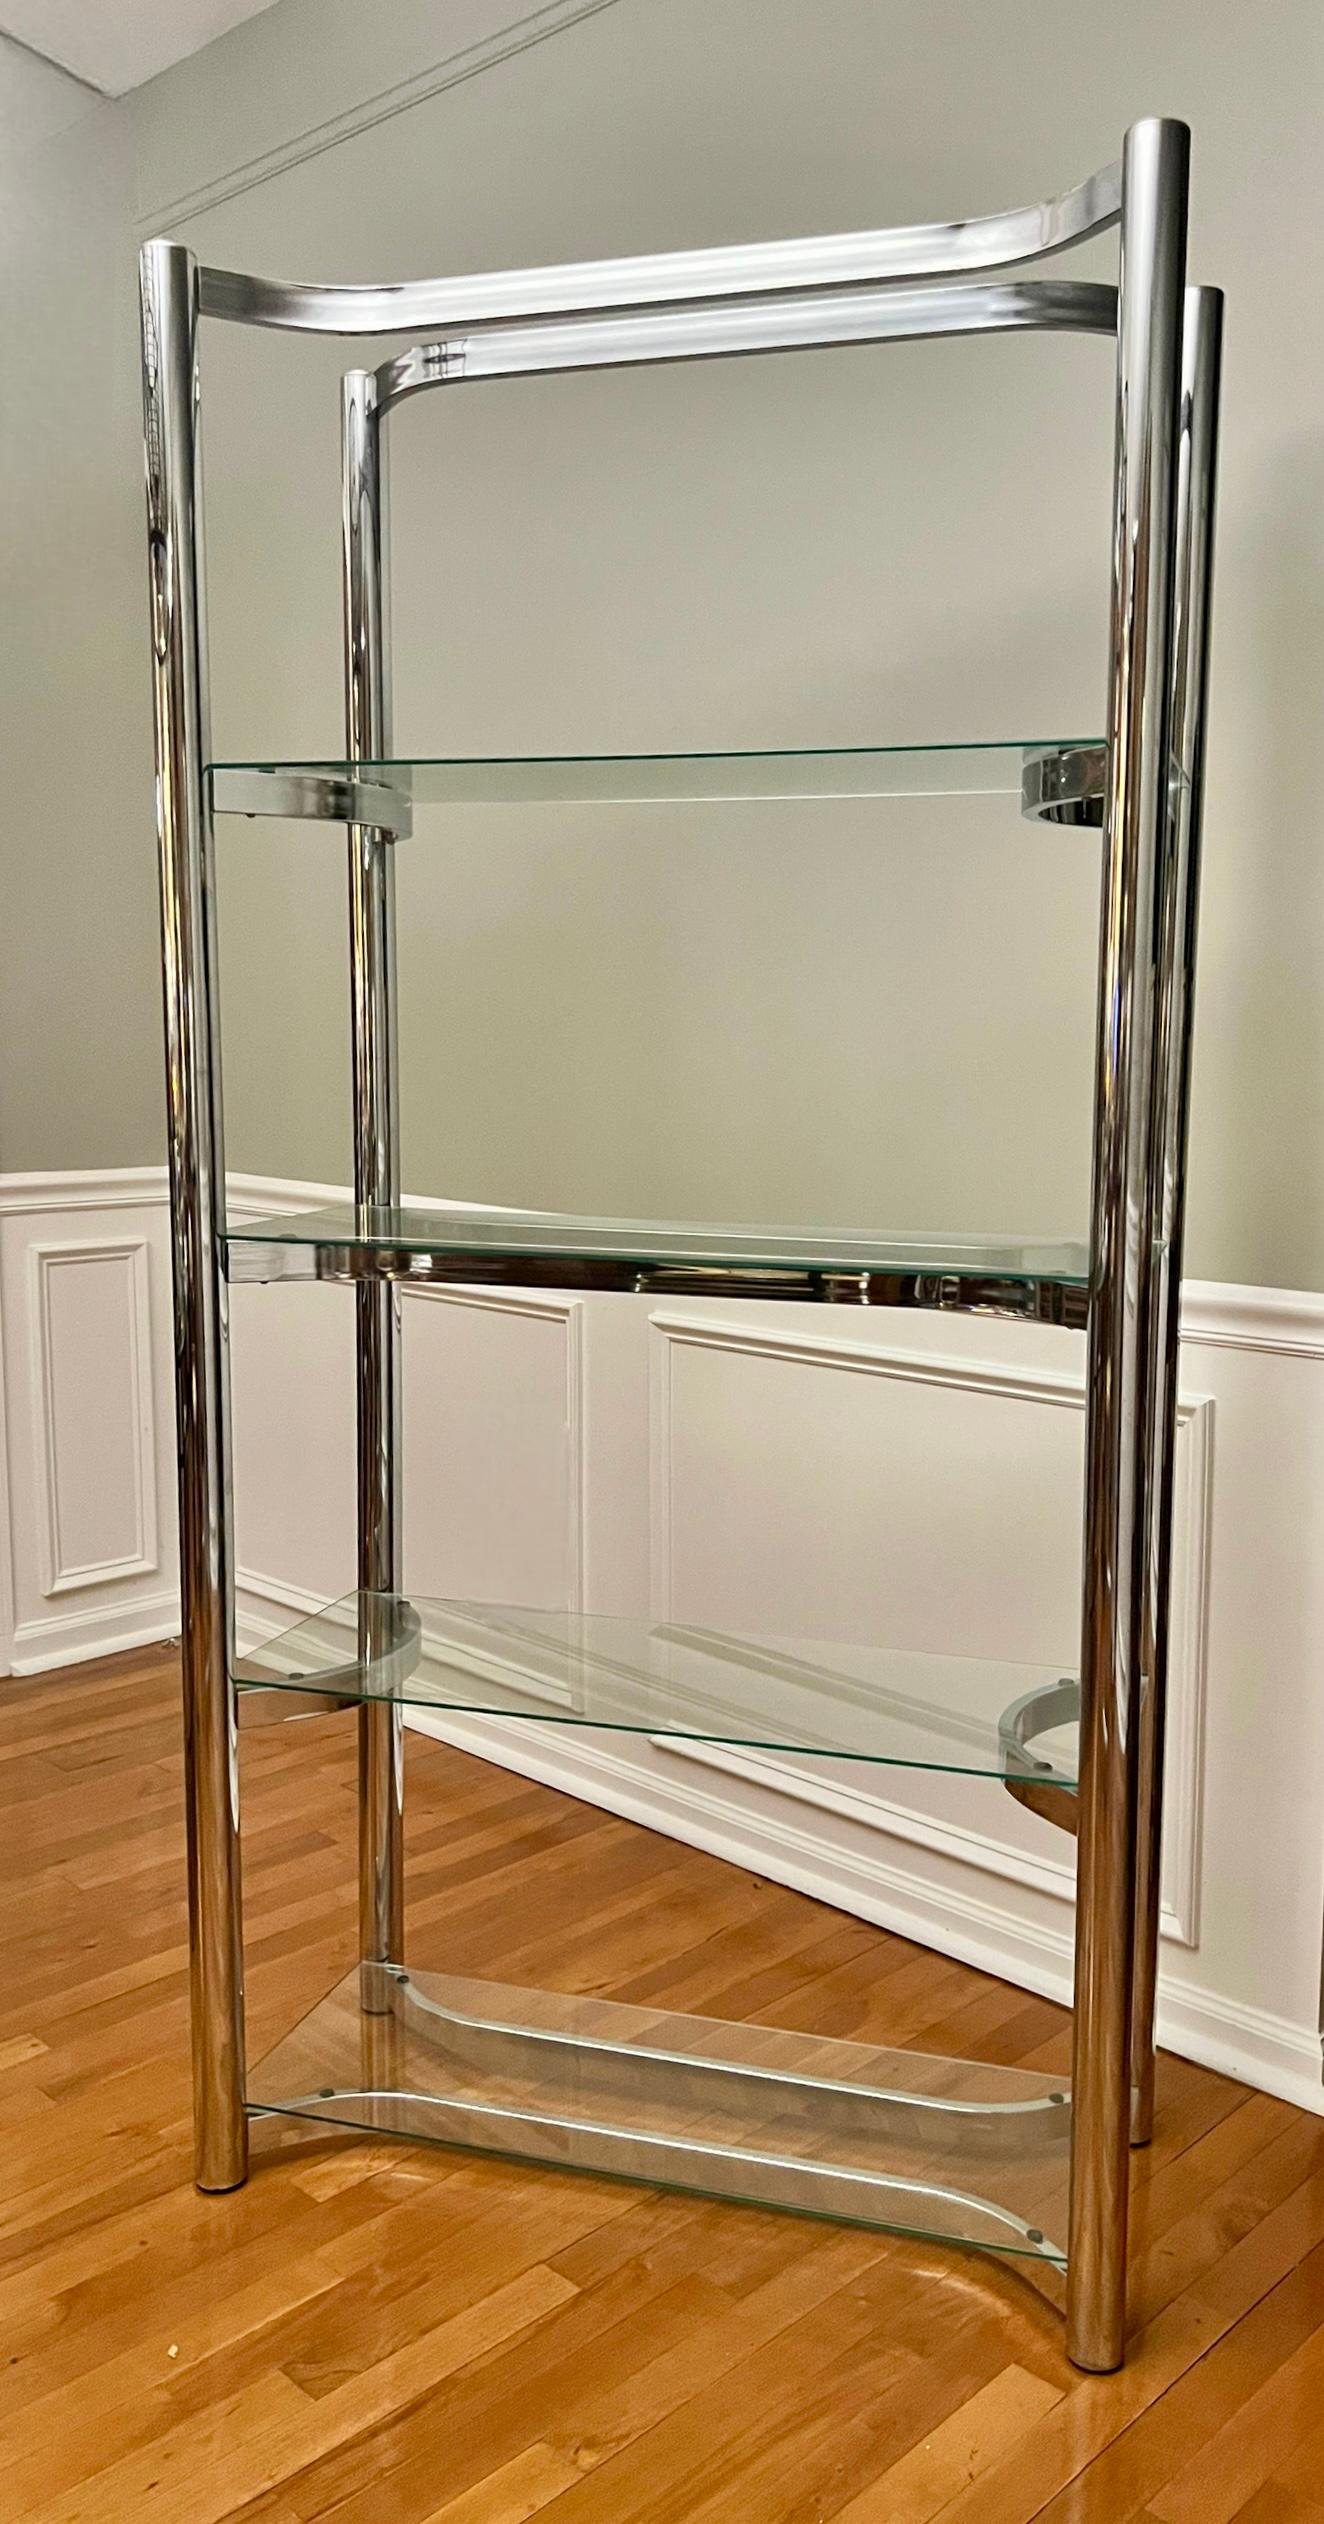 1970s chrome etagere with four glass shelves attributed to Milo Baughman.

Chrome plated steel frame with flat bar shelf supports set in an alternating curved pattern which add visual interest and nicely complement the thick tubular chrome